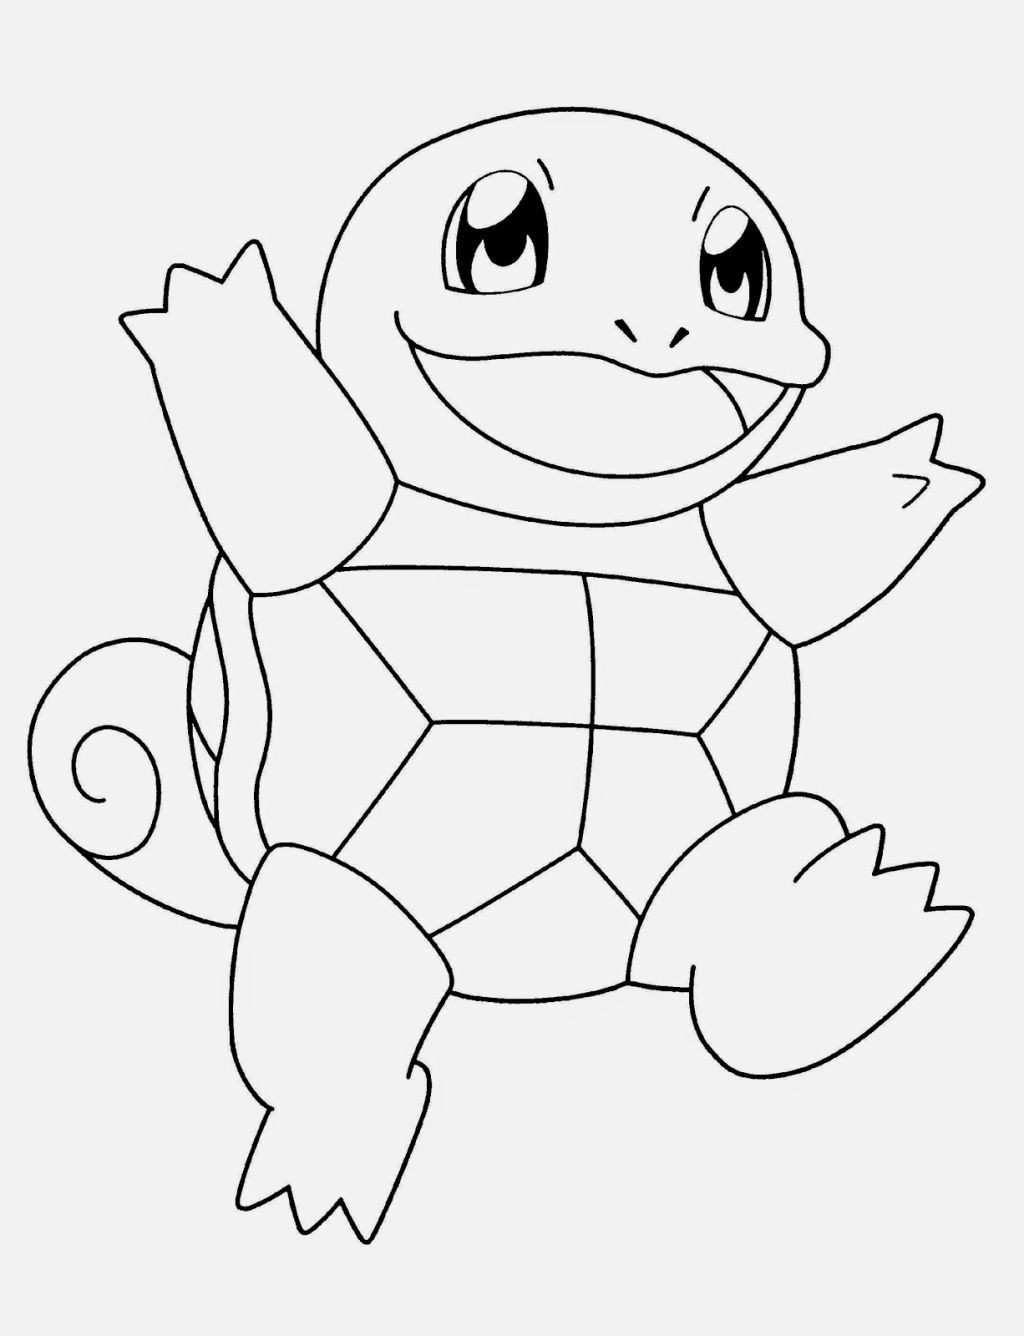 Kids Coloring Pages Pokemon
 Pokemon Coloring Book Pages Coloring Pages